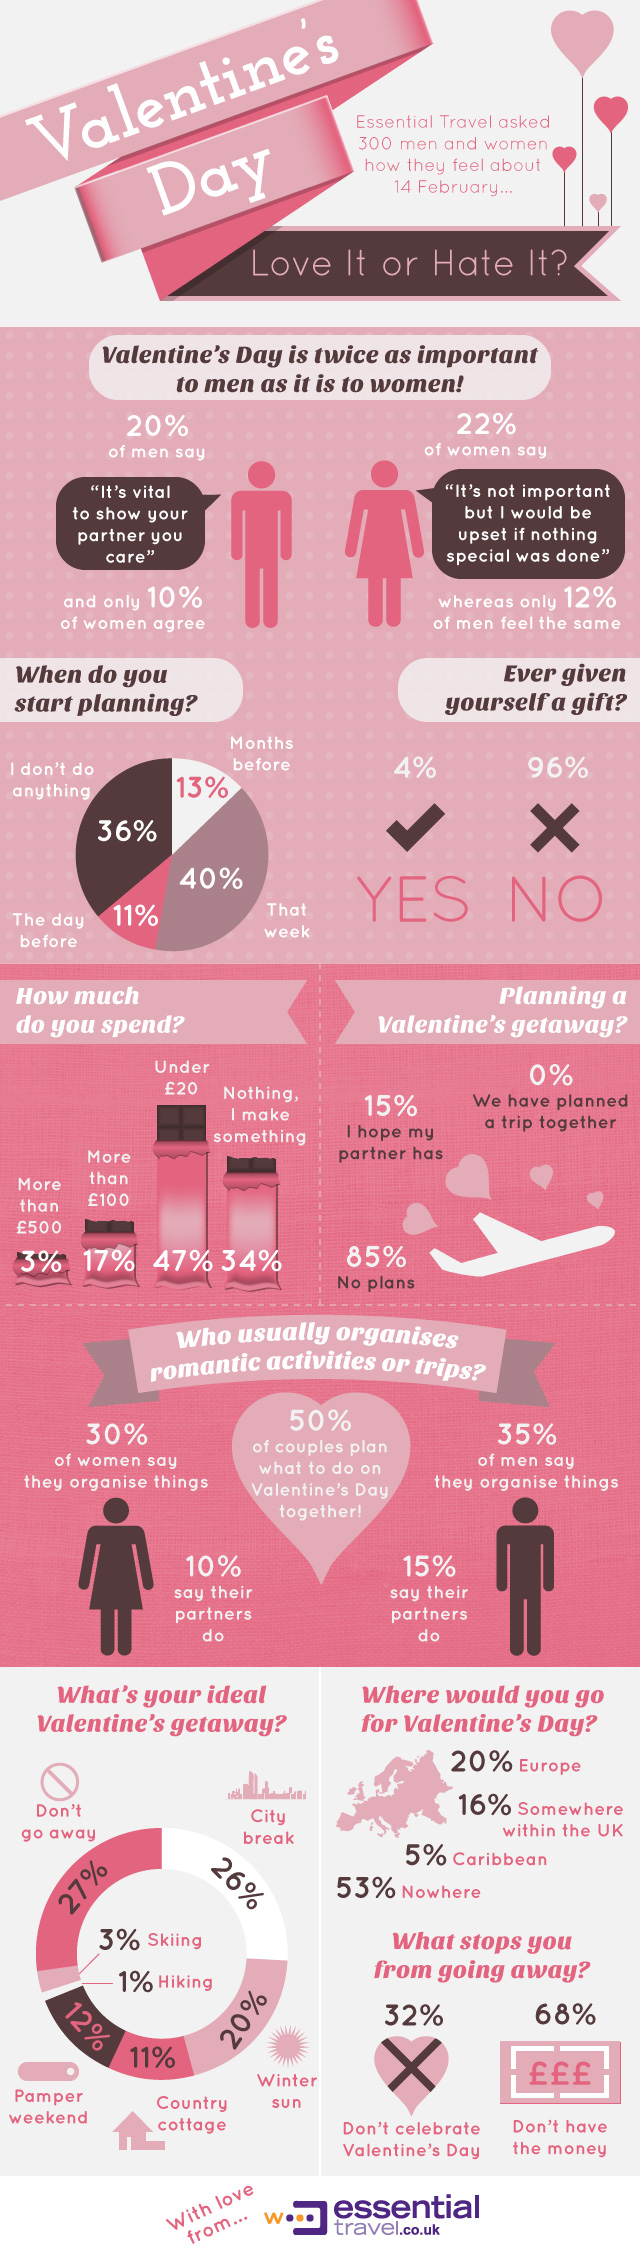 Valentine's Day - Love it or hate it?